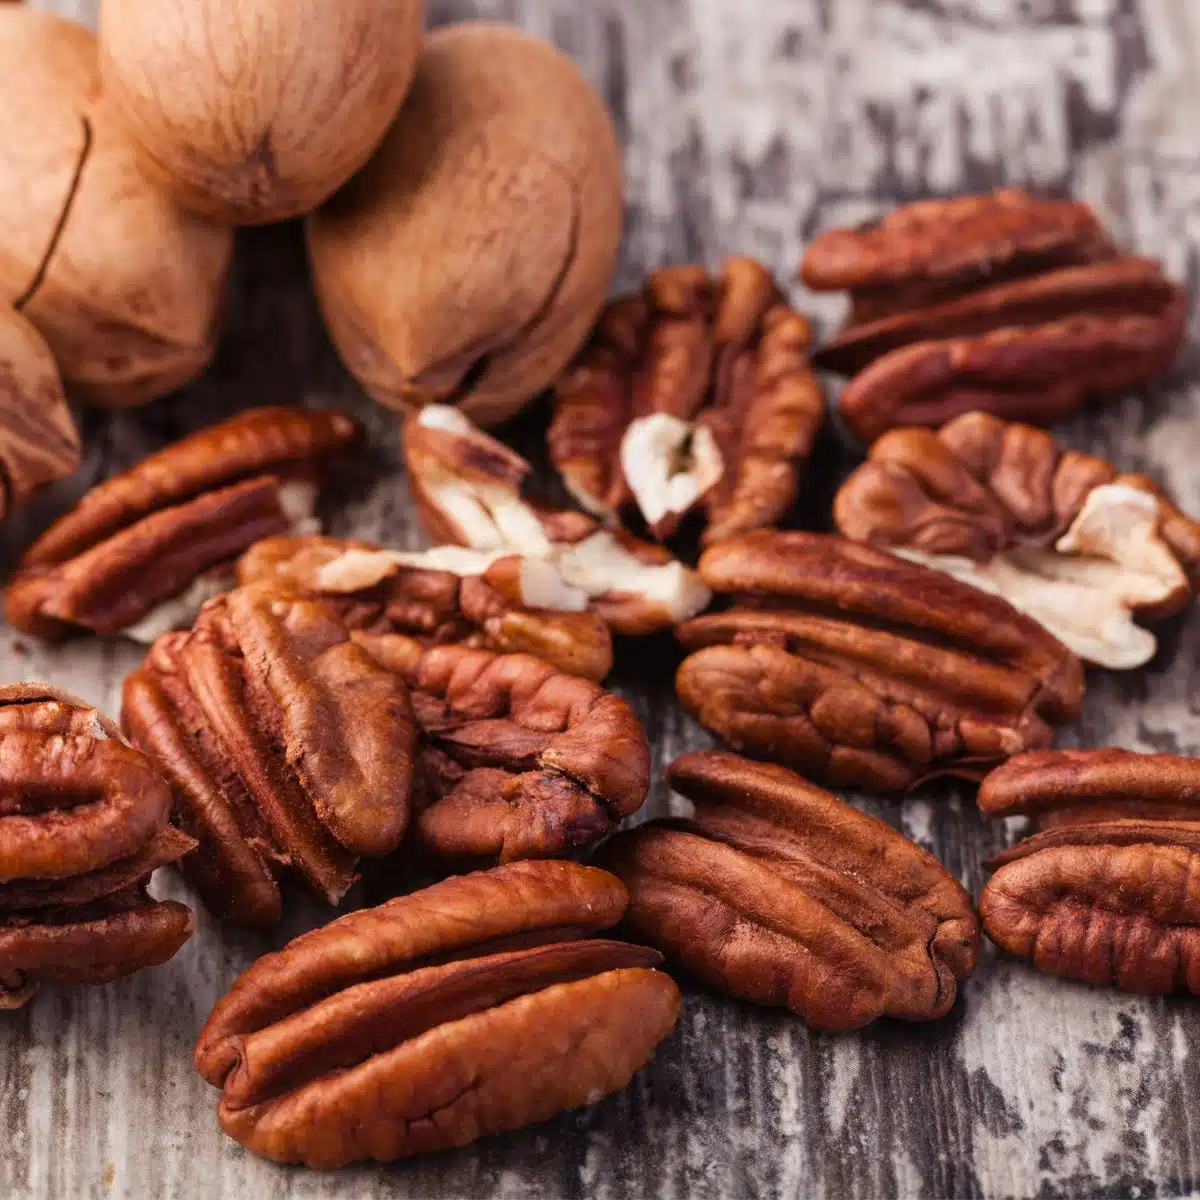 Square image of pecans on grey wood background.